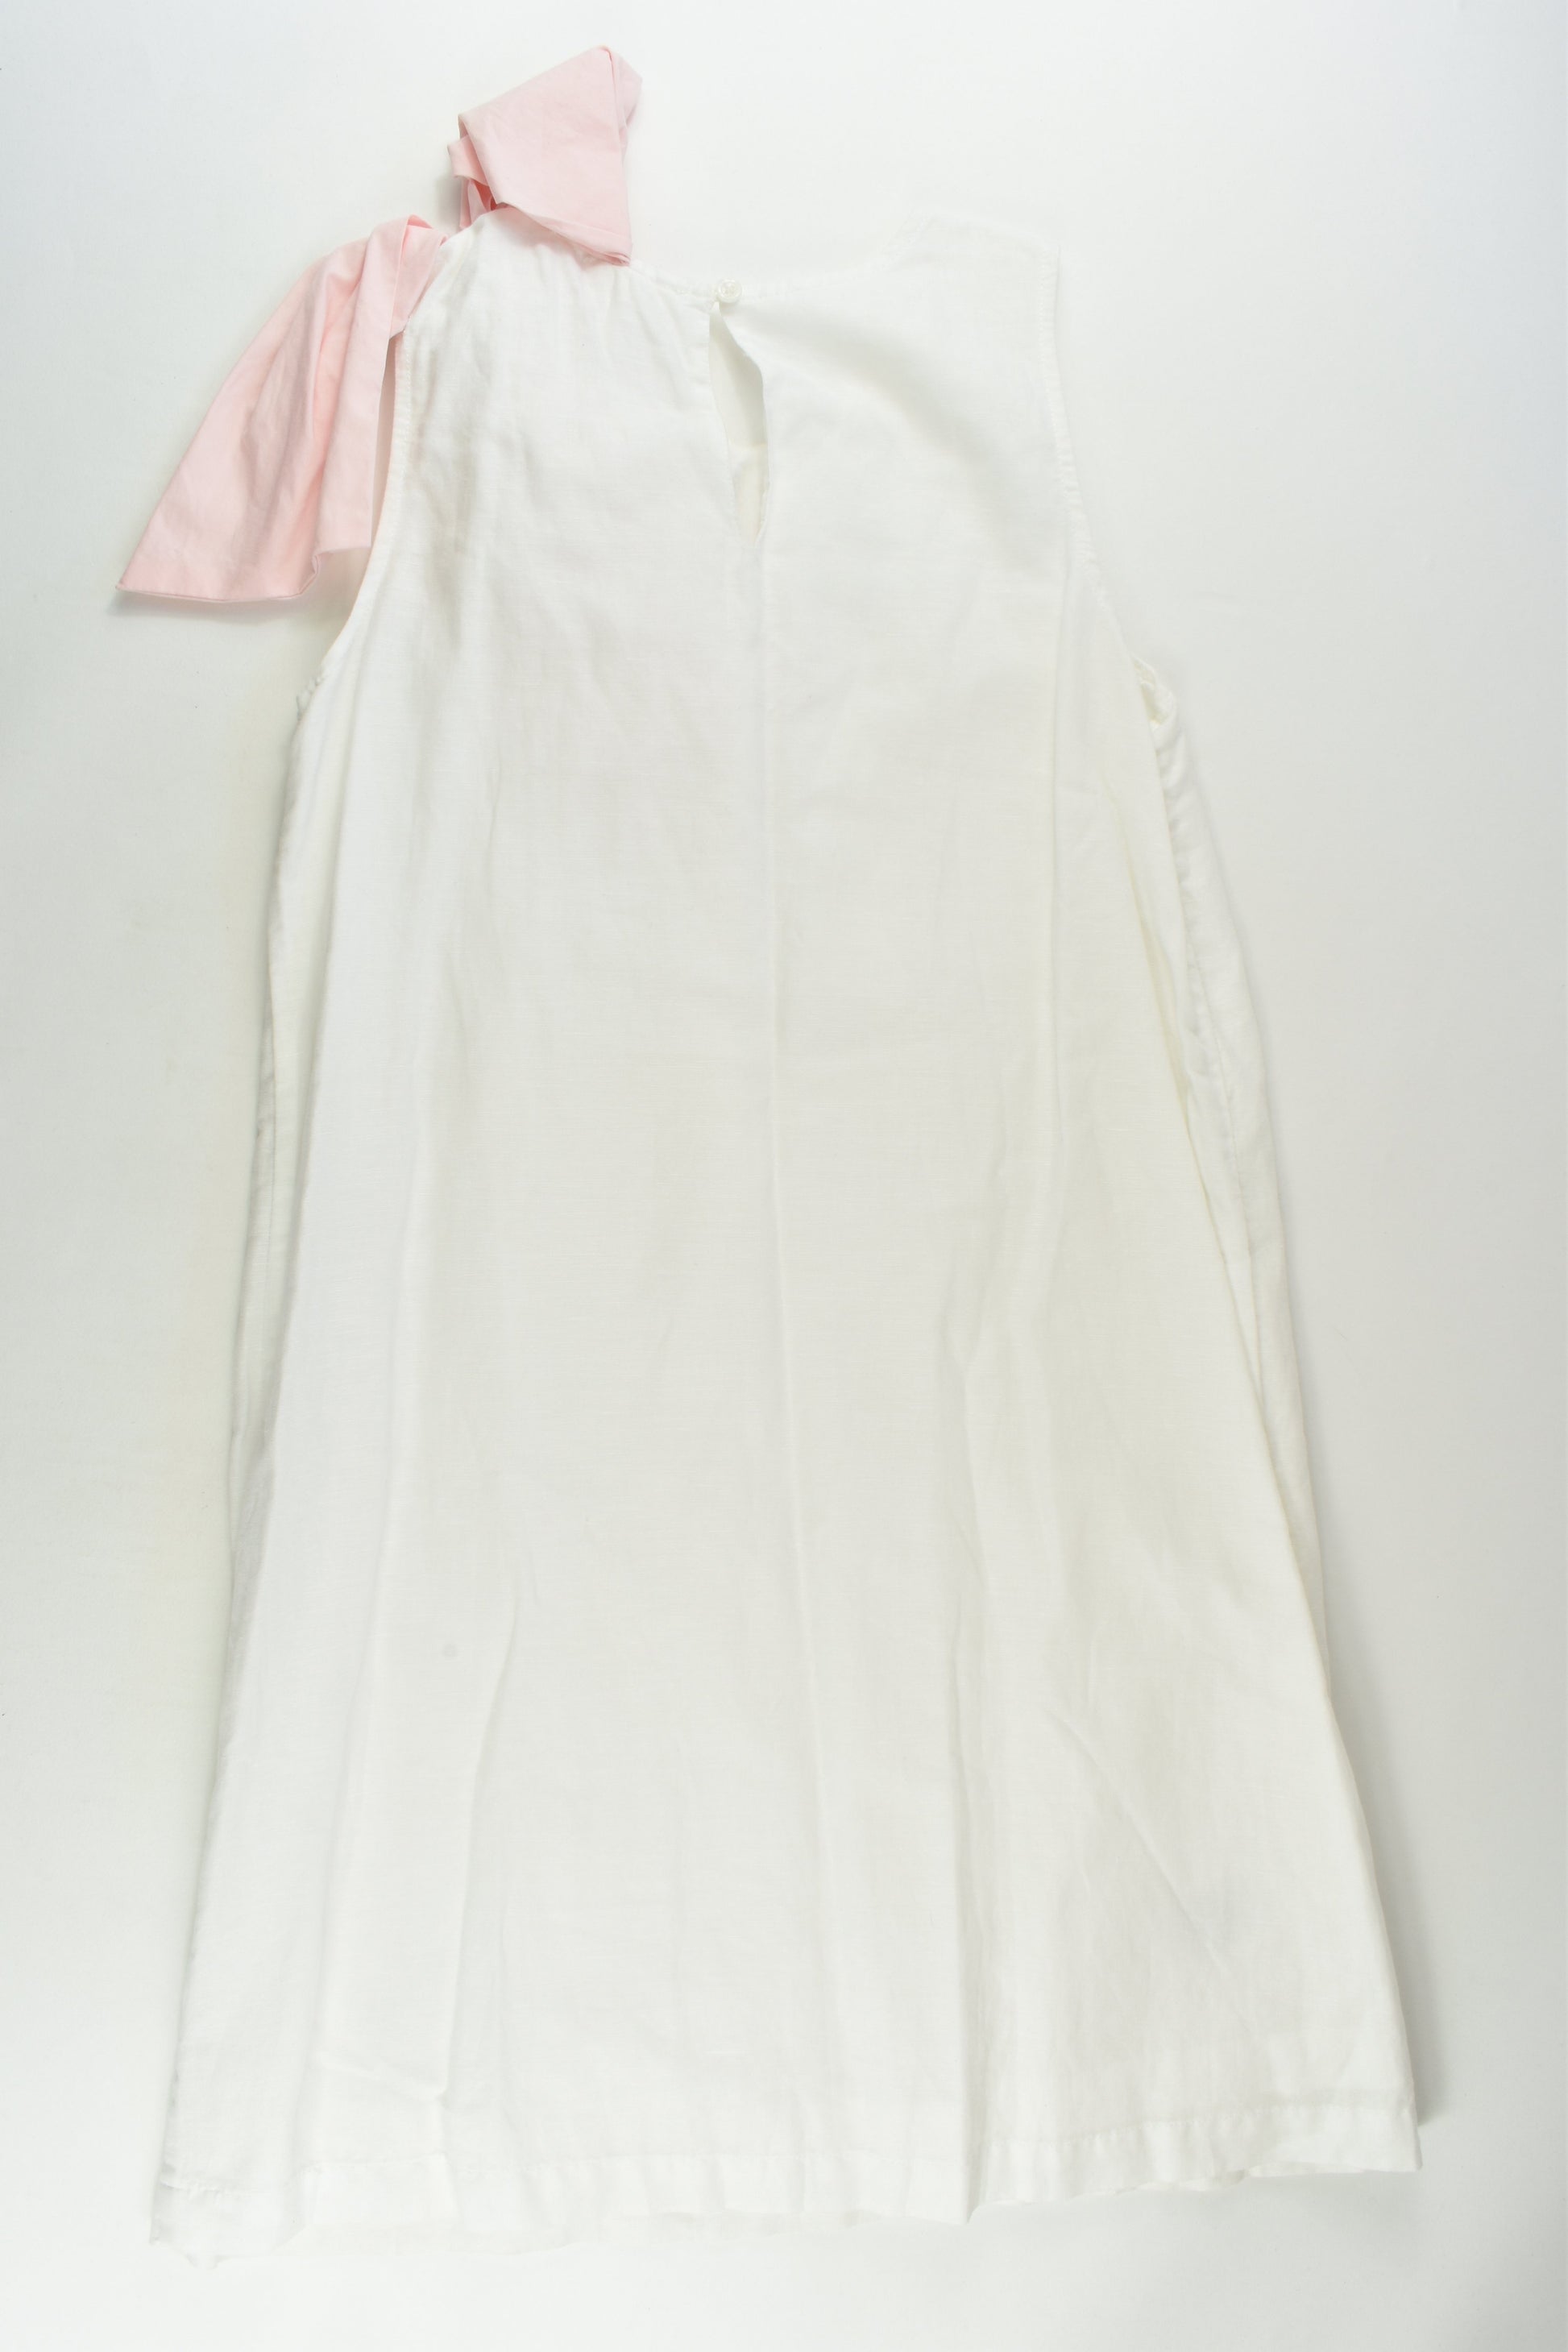 Country Road Size 12 Linen Blend Pink Bow Lined Dress